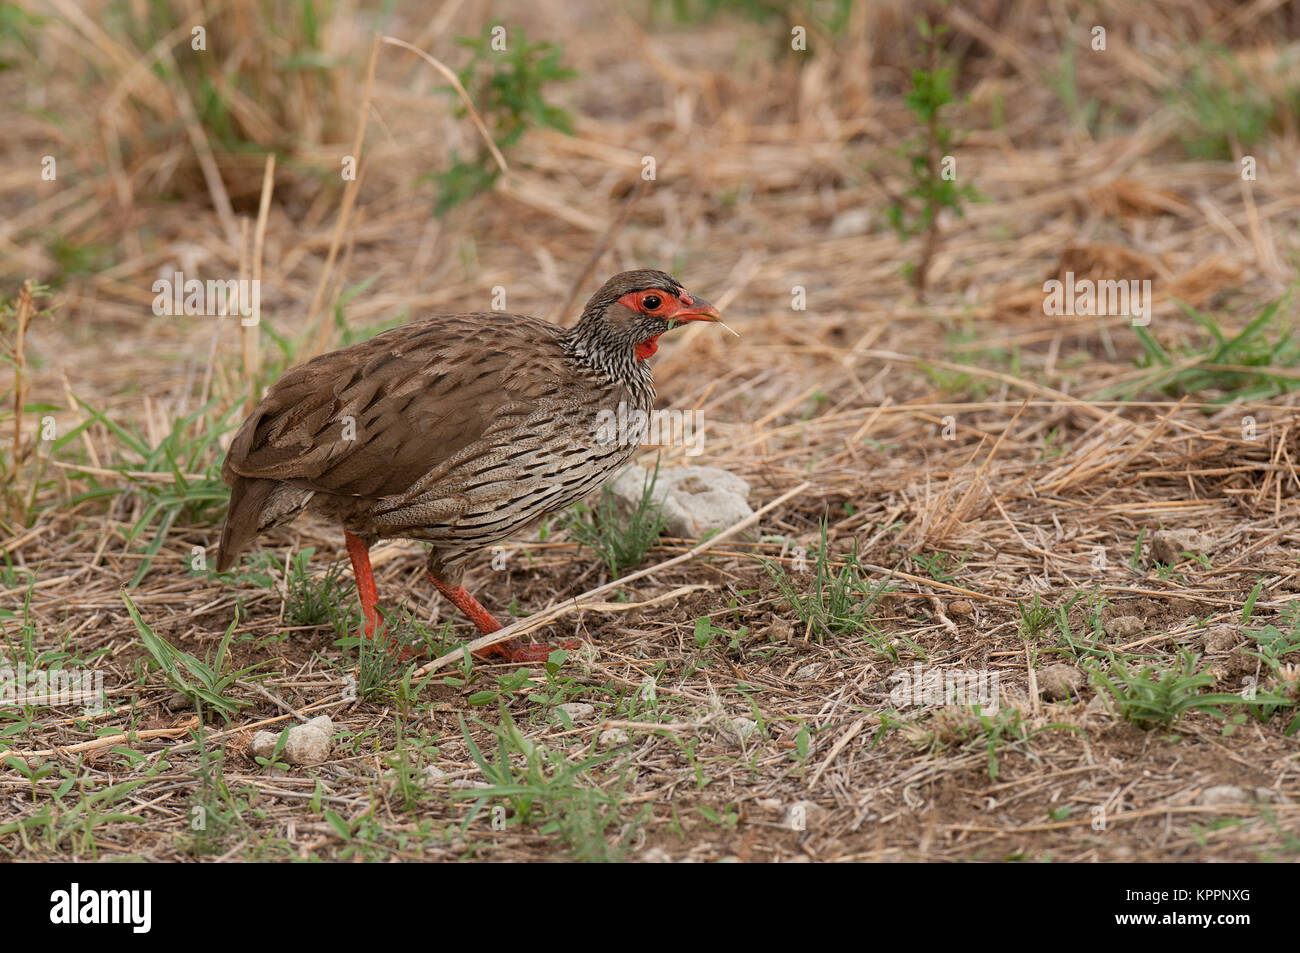 Red-necked Spurfowl or Red-necked Froncolin (pternistis afer or Froncolinuus afer) hunting for food in Tarangire national Park Stock Photo